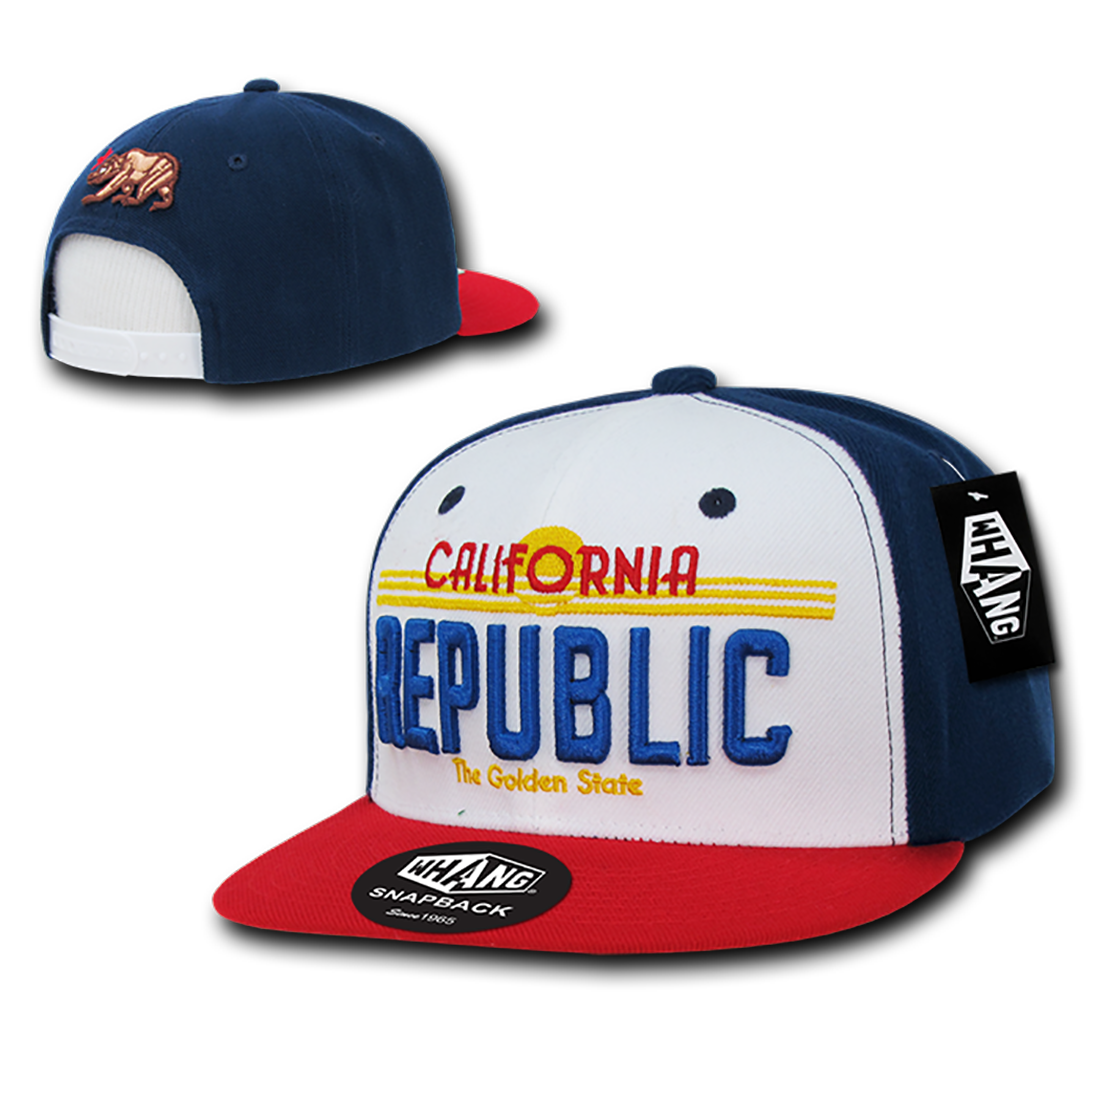 New CALIFORNIA REPUBLIC SNAPBACK HAT Navy, White & Red Golden State License Plate